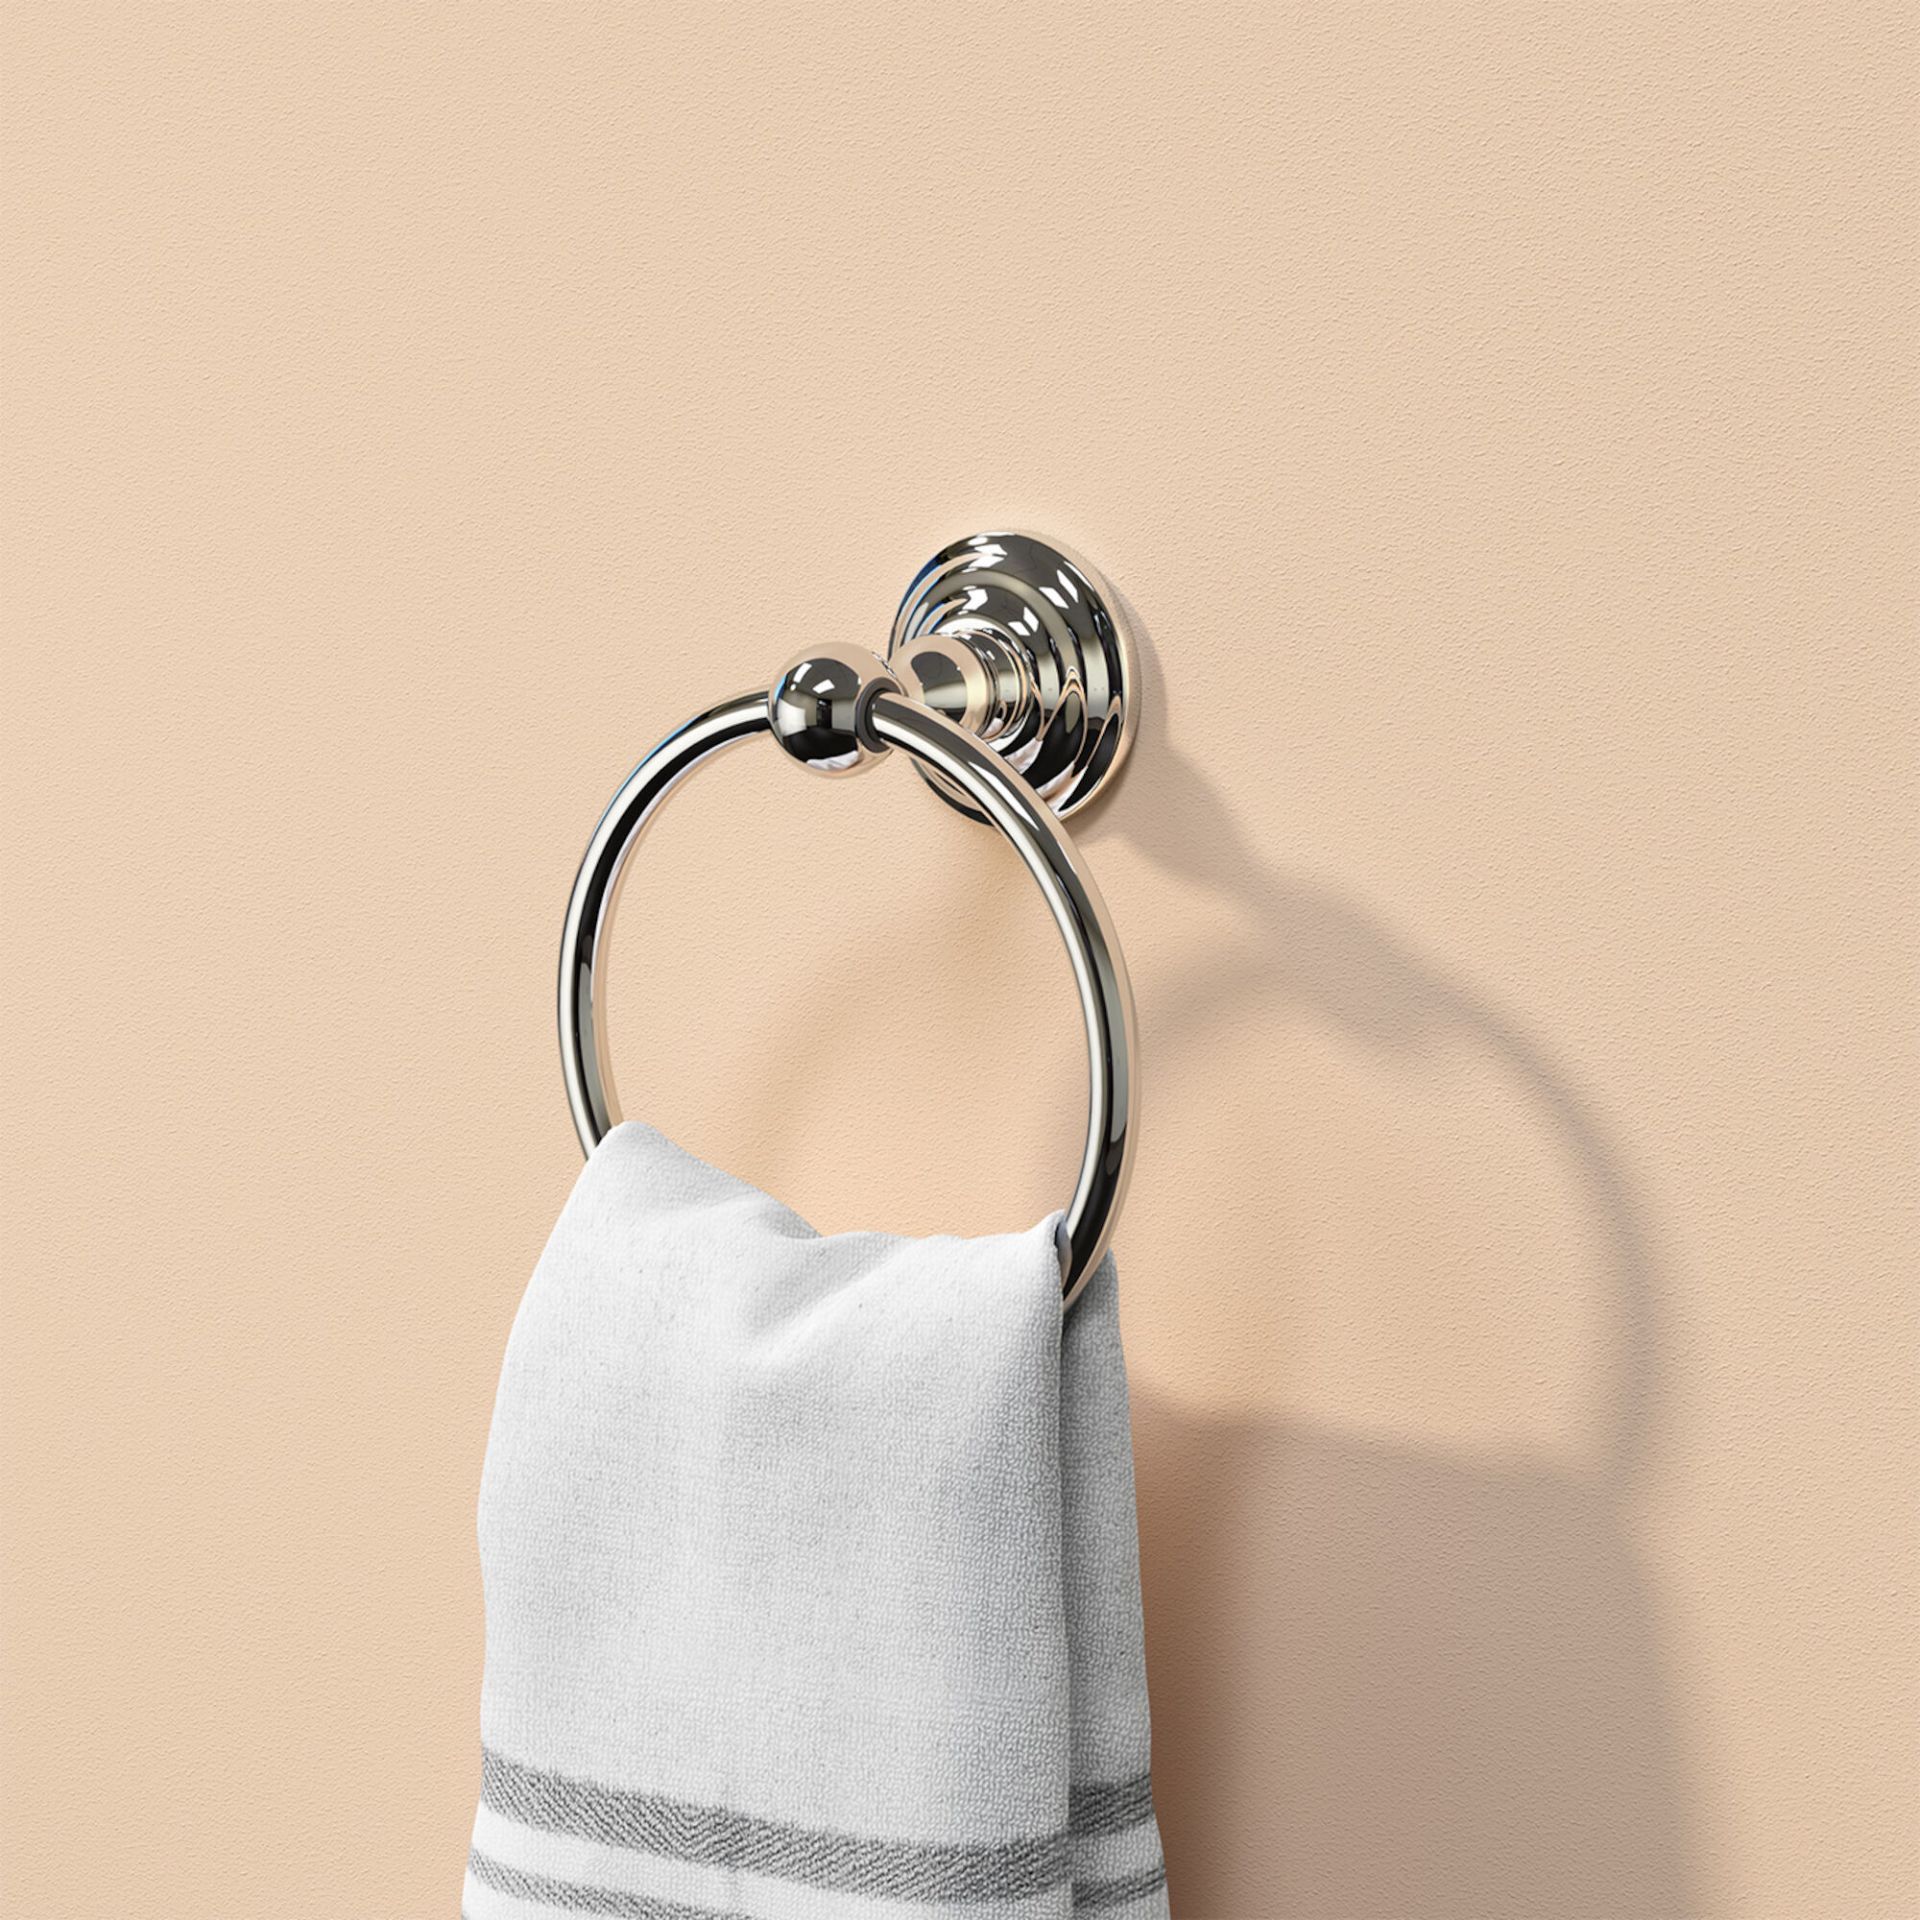 (EE1019) York Towel Ring Finishes your bathroom with a little extra functionality and style M...